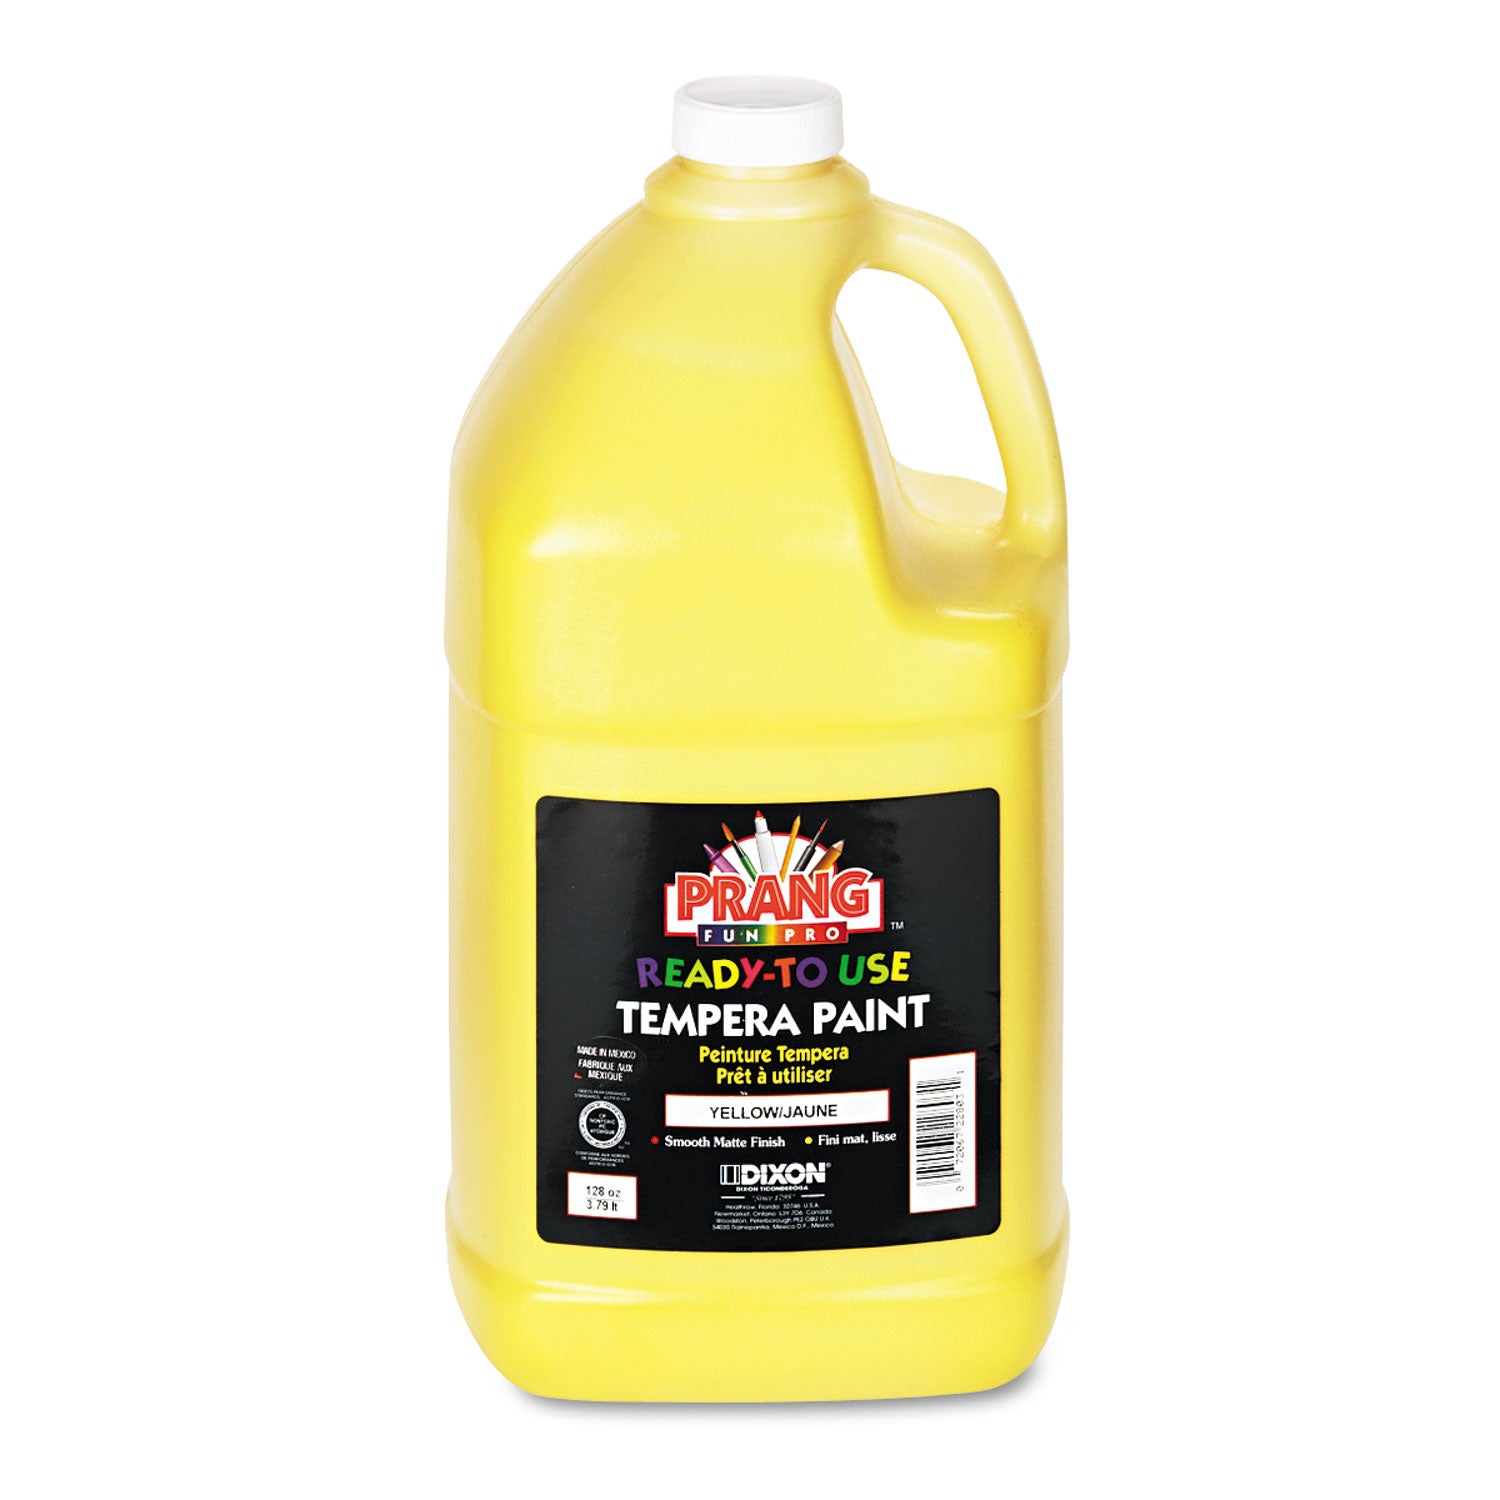 Ready-to-Use Tempera Paint, Yellow, 1 gal Bottle - 